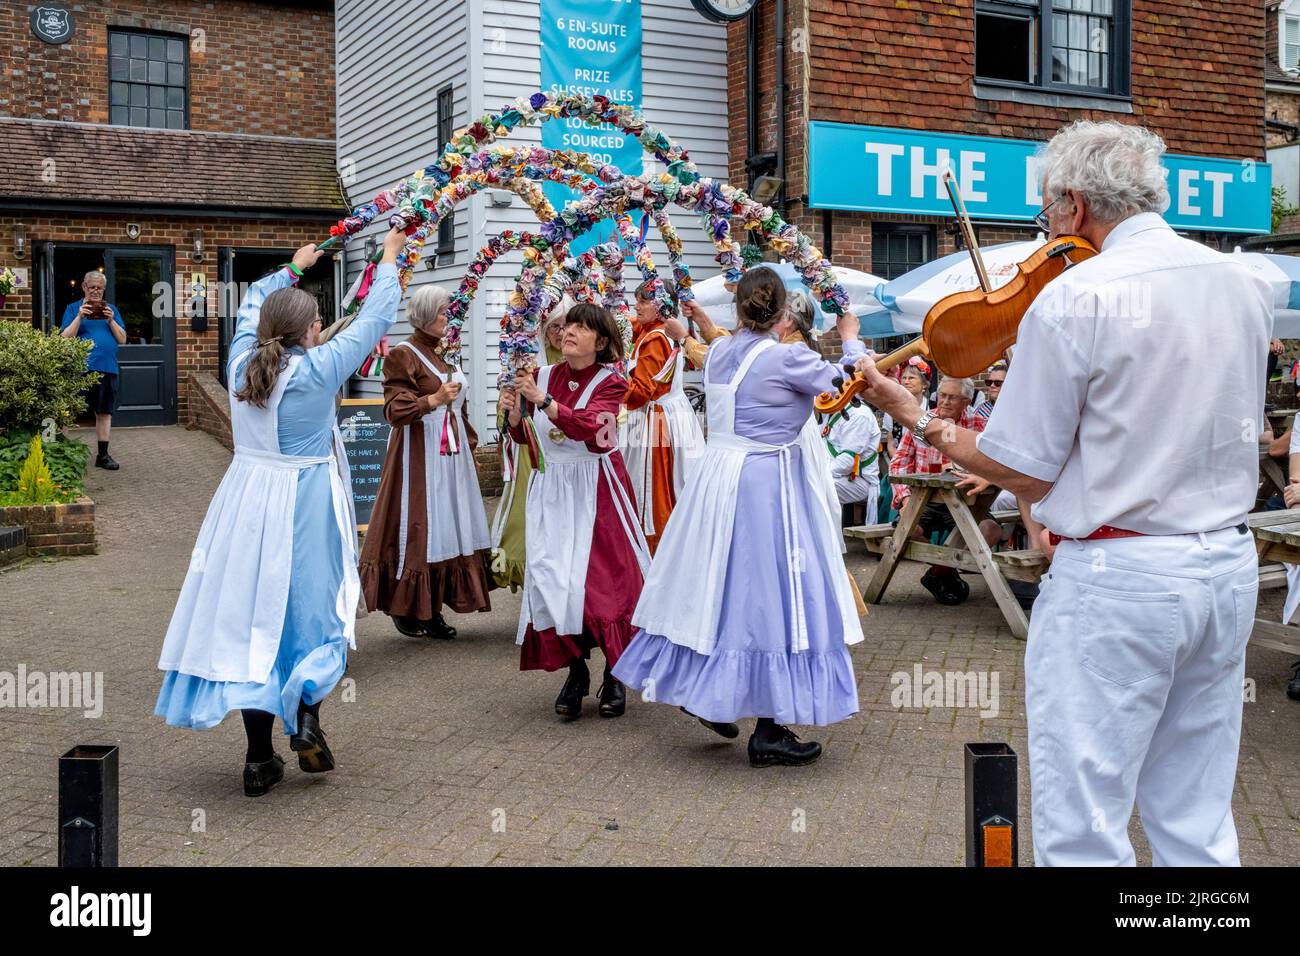 The Knots Of May Female Morris Dancers Perform Outside The Dorset Pub In Lewes, East Sussex, UK. Stock Photo